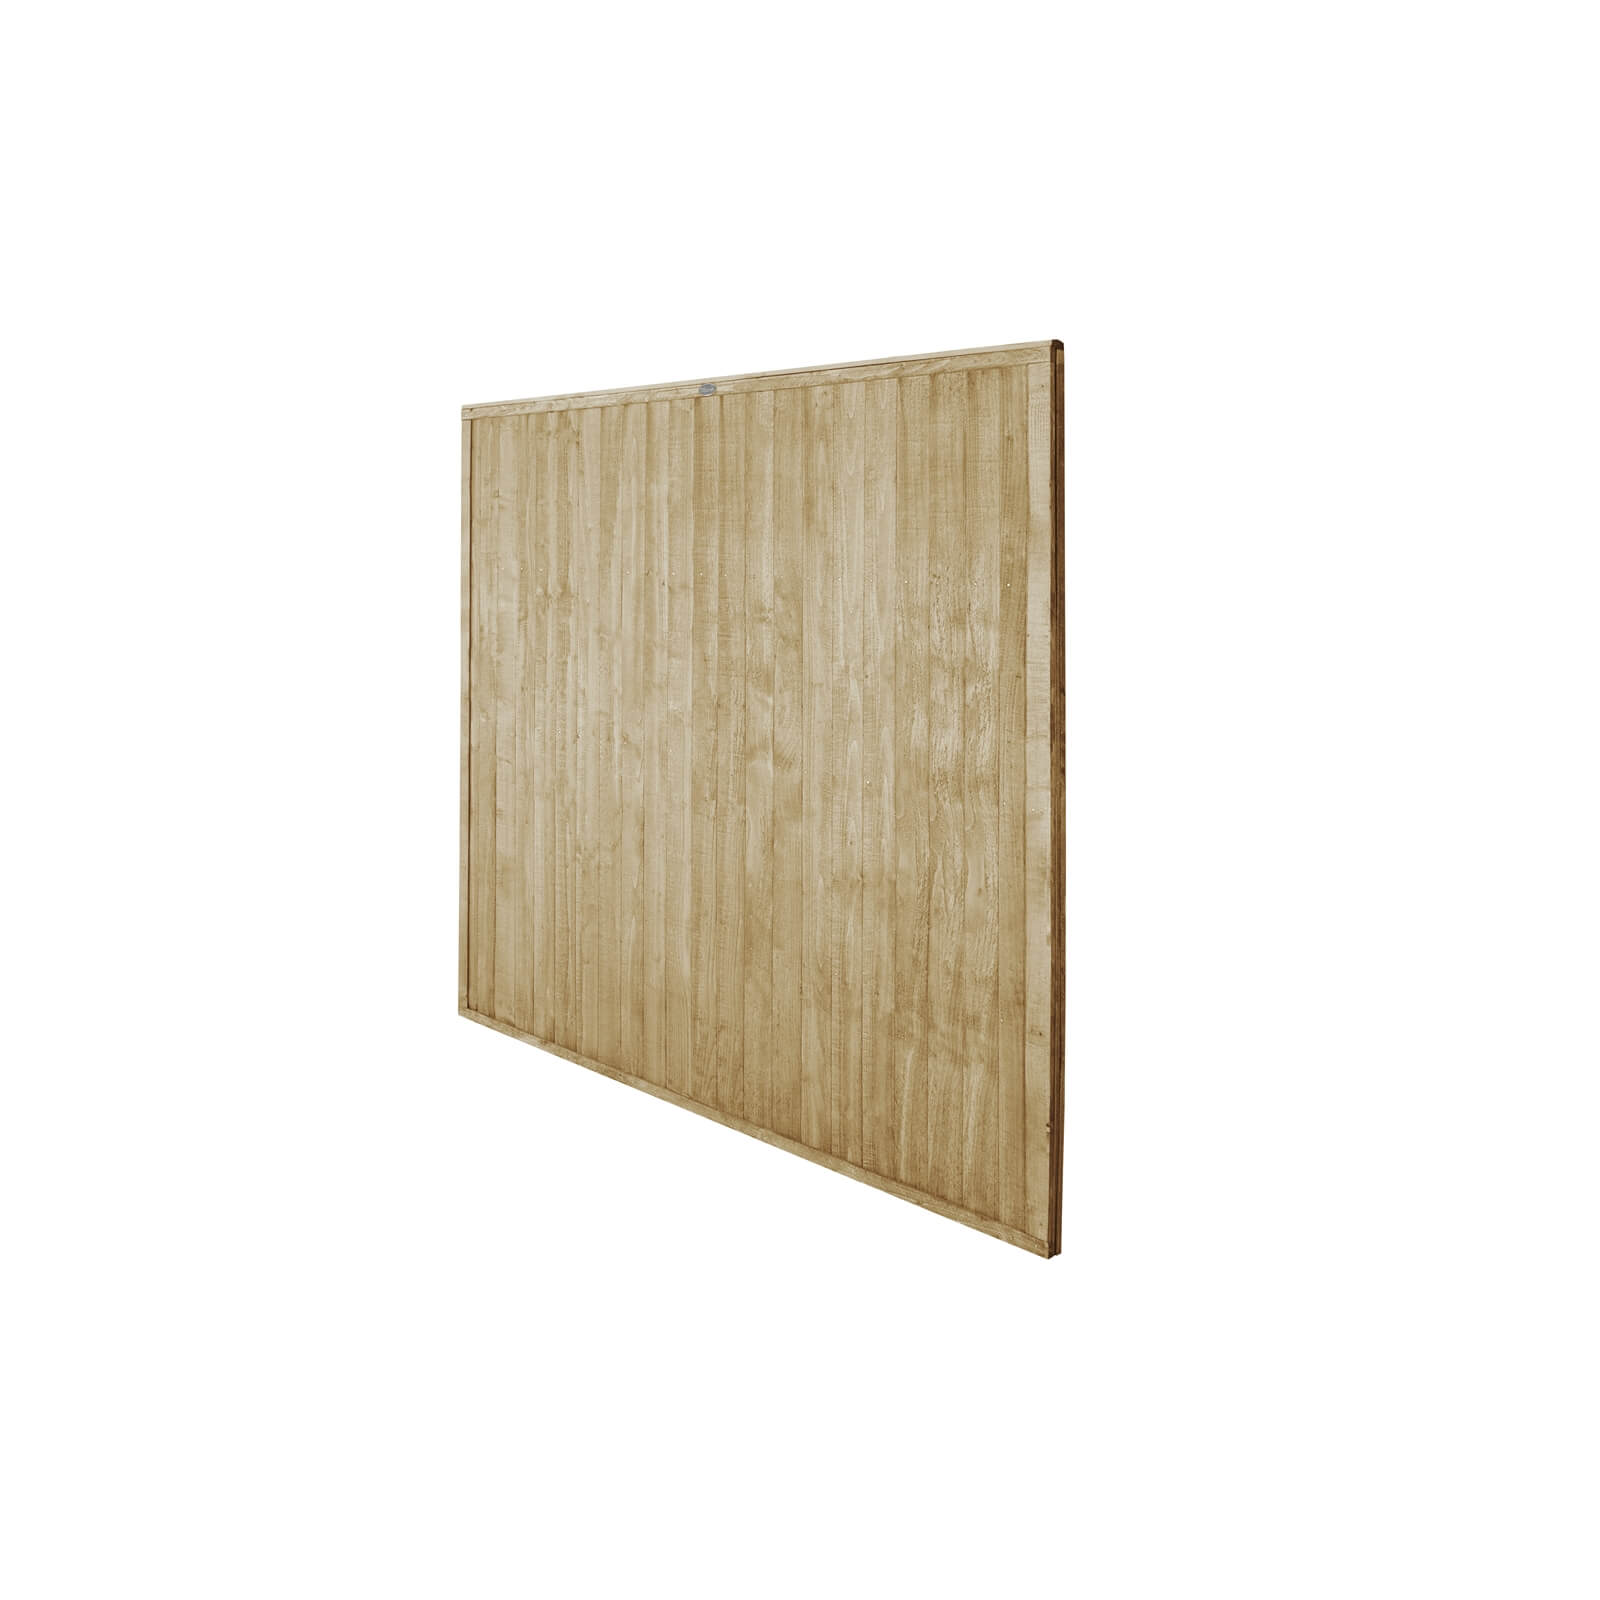 6ft x 6ft (1.83m x 1.83m) Pressure Treated Closeboard Fence Panel - Pack of 5